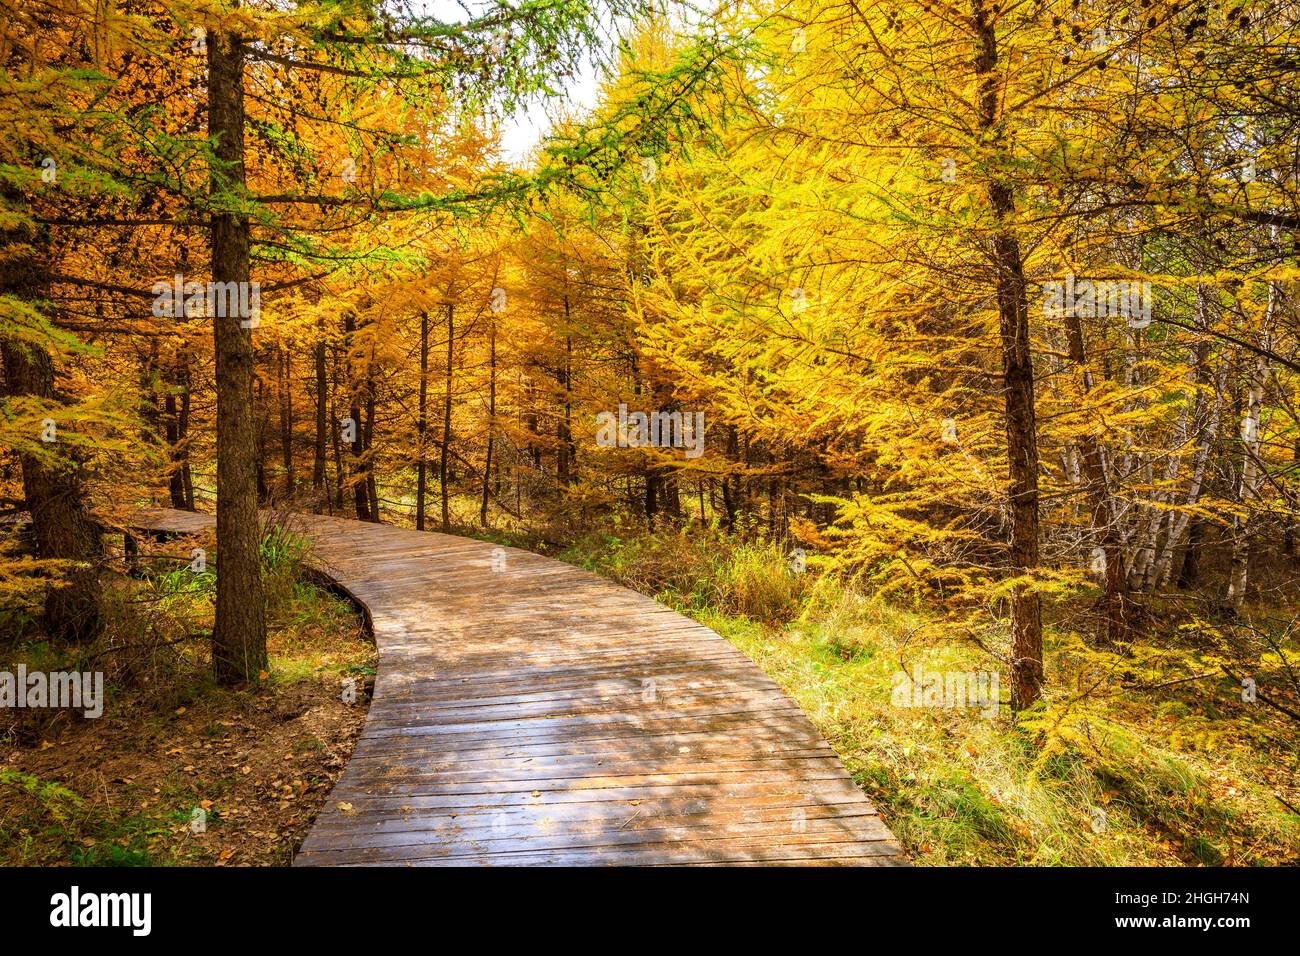 Boardwalk through the autumn forest.Beautiful colorful autumn forest. Stock Photo